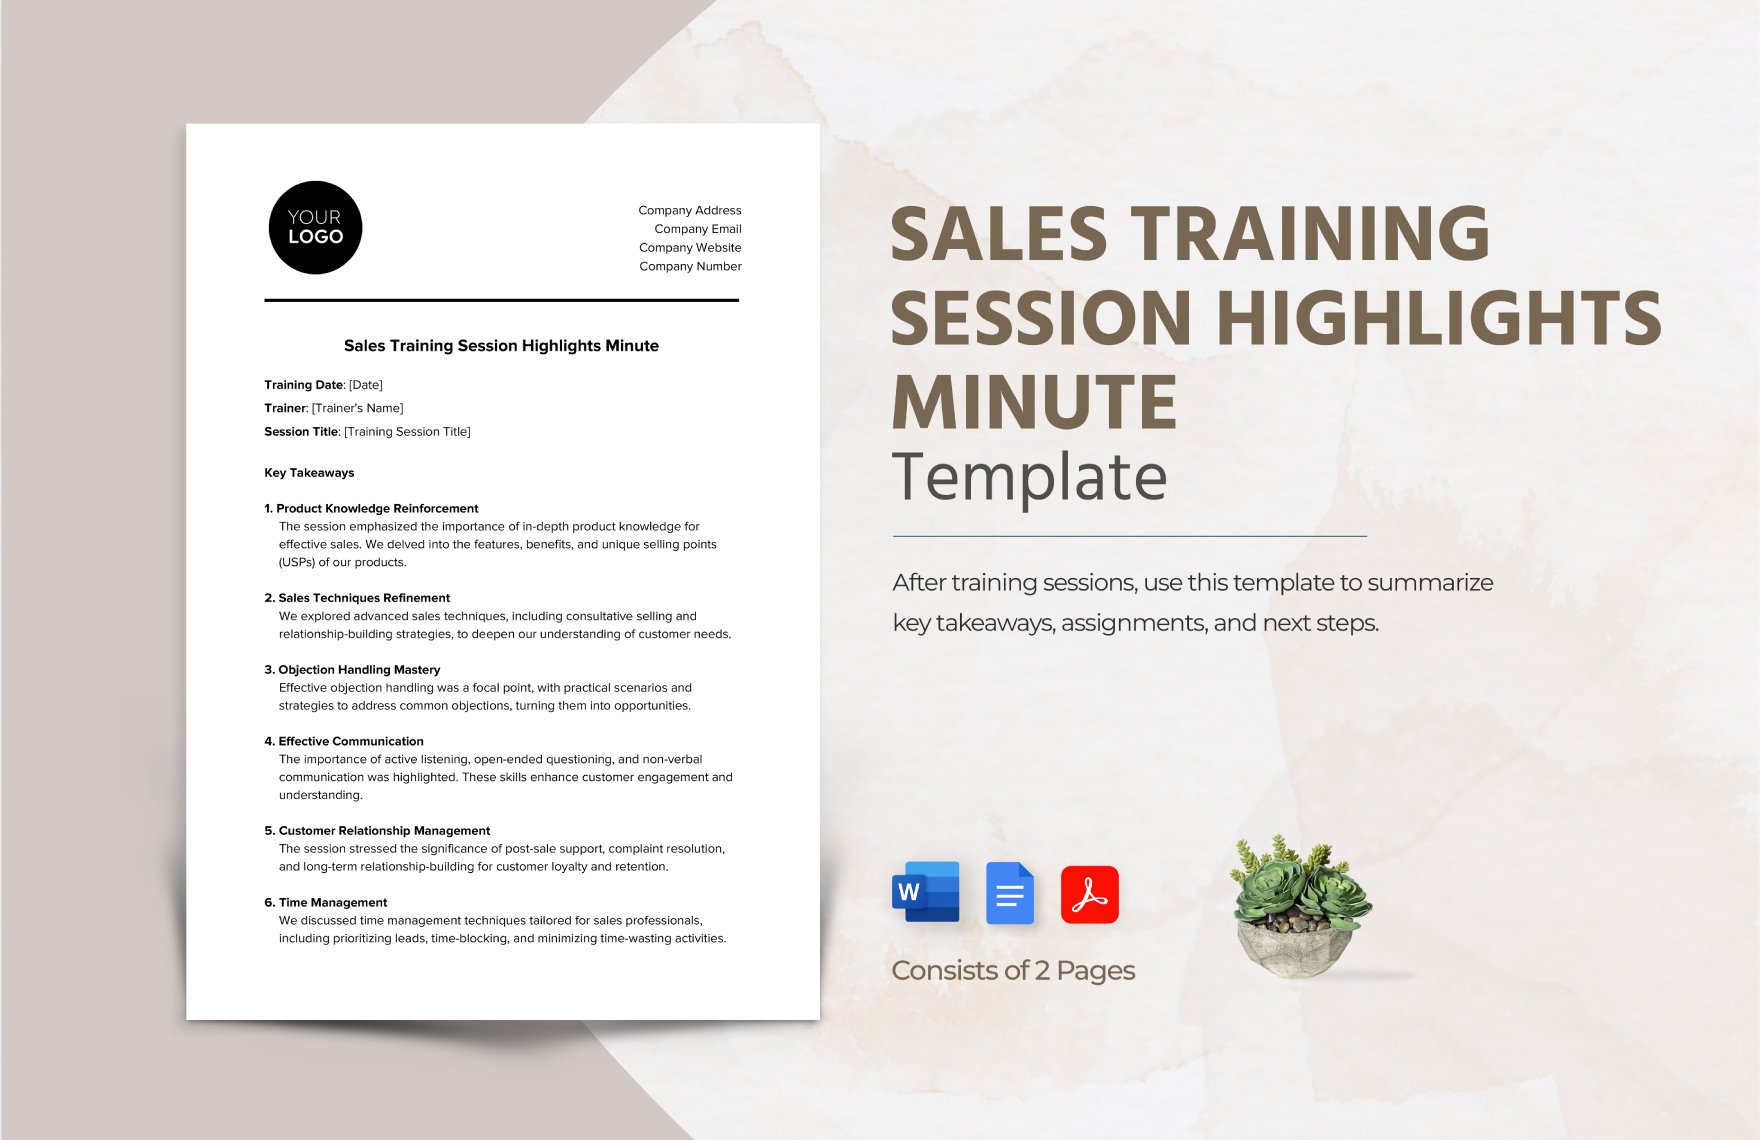 Sales Training Session Highlights Minute Template in Word, Google Docs, PDF